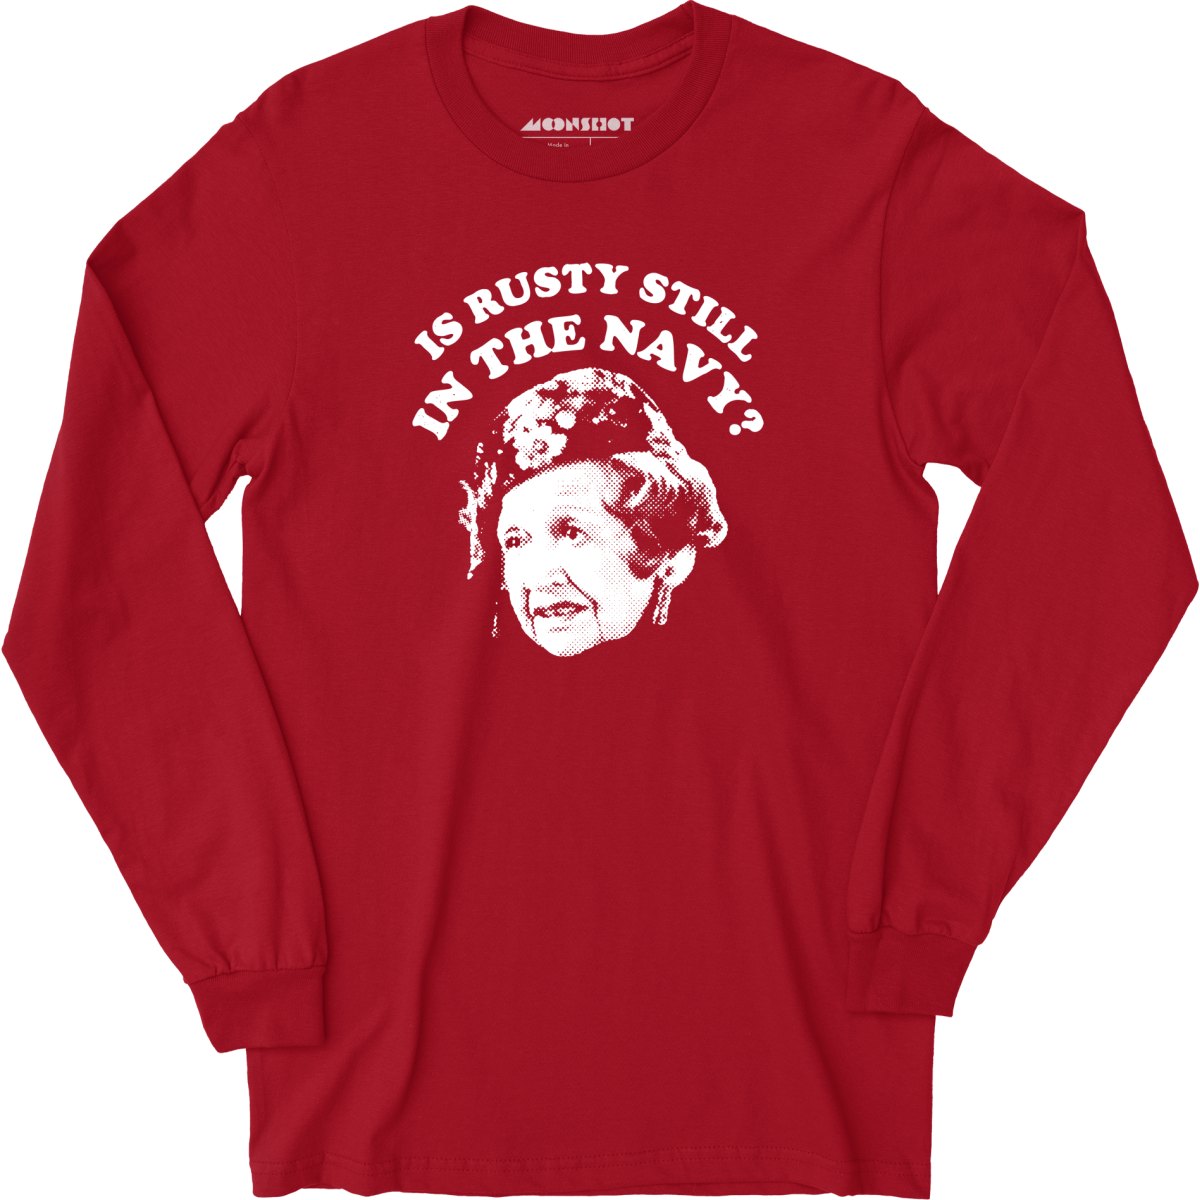 Is Rusty Still in the Navy? - Long Sleeve T-Shirt